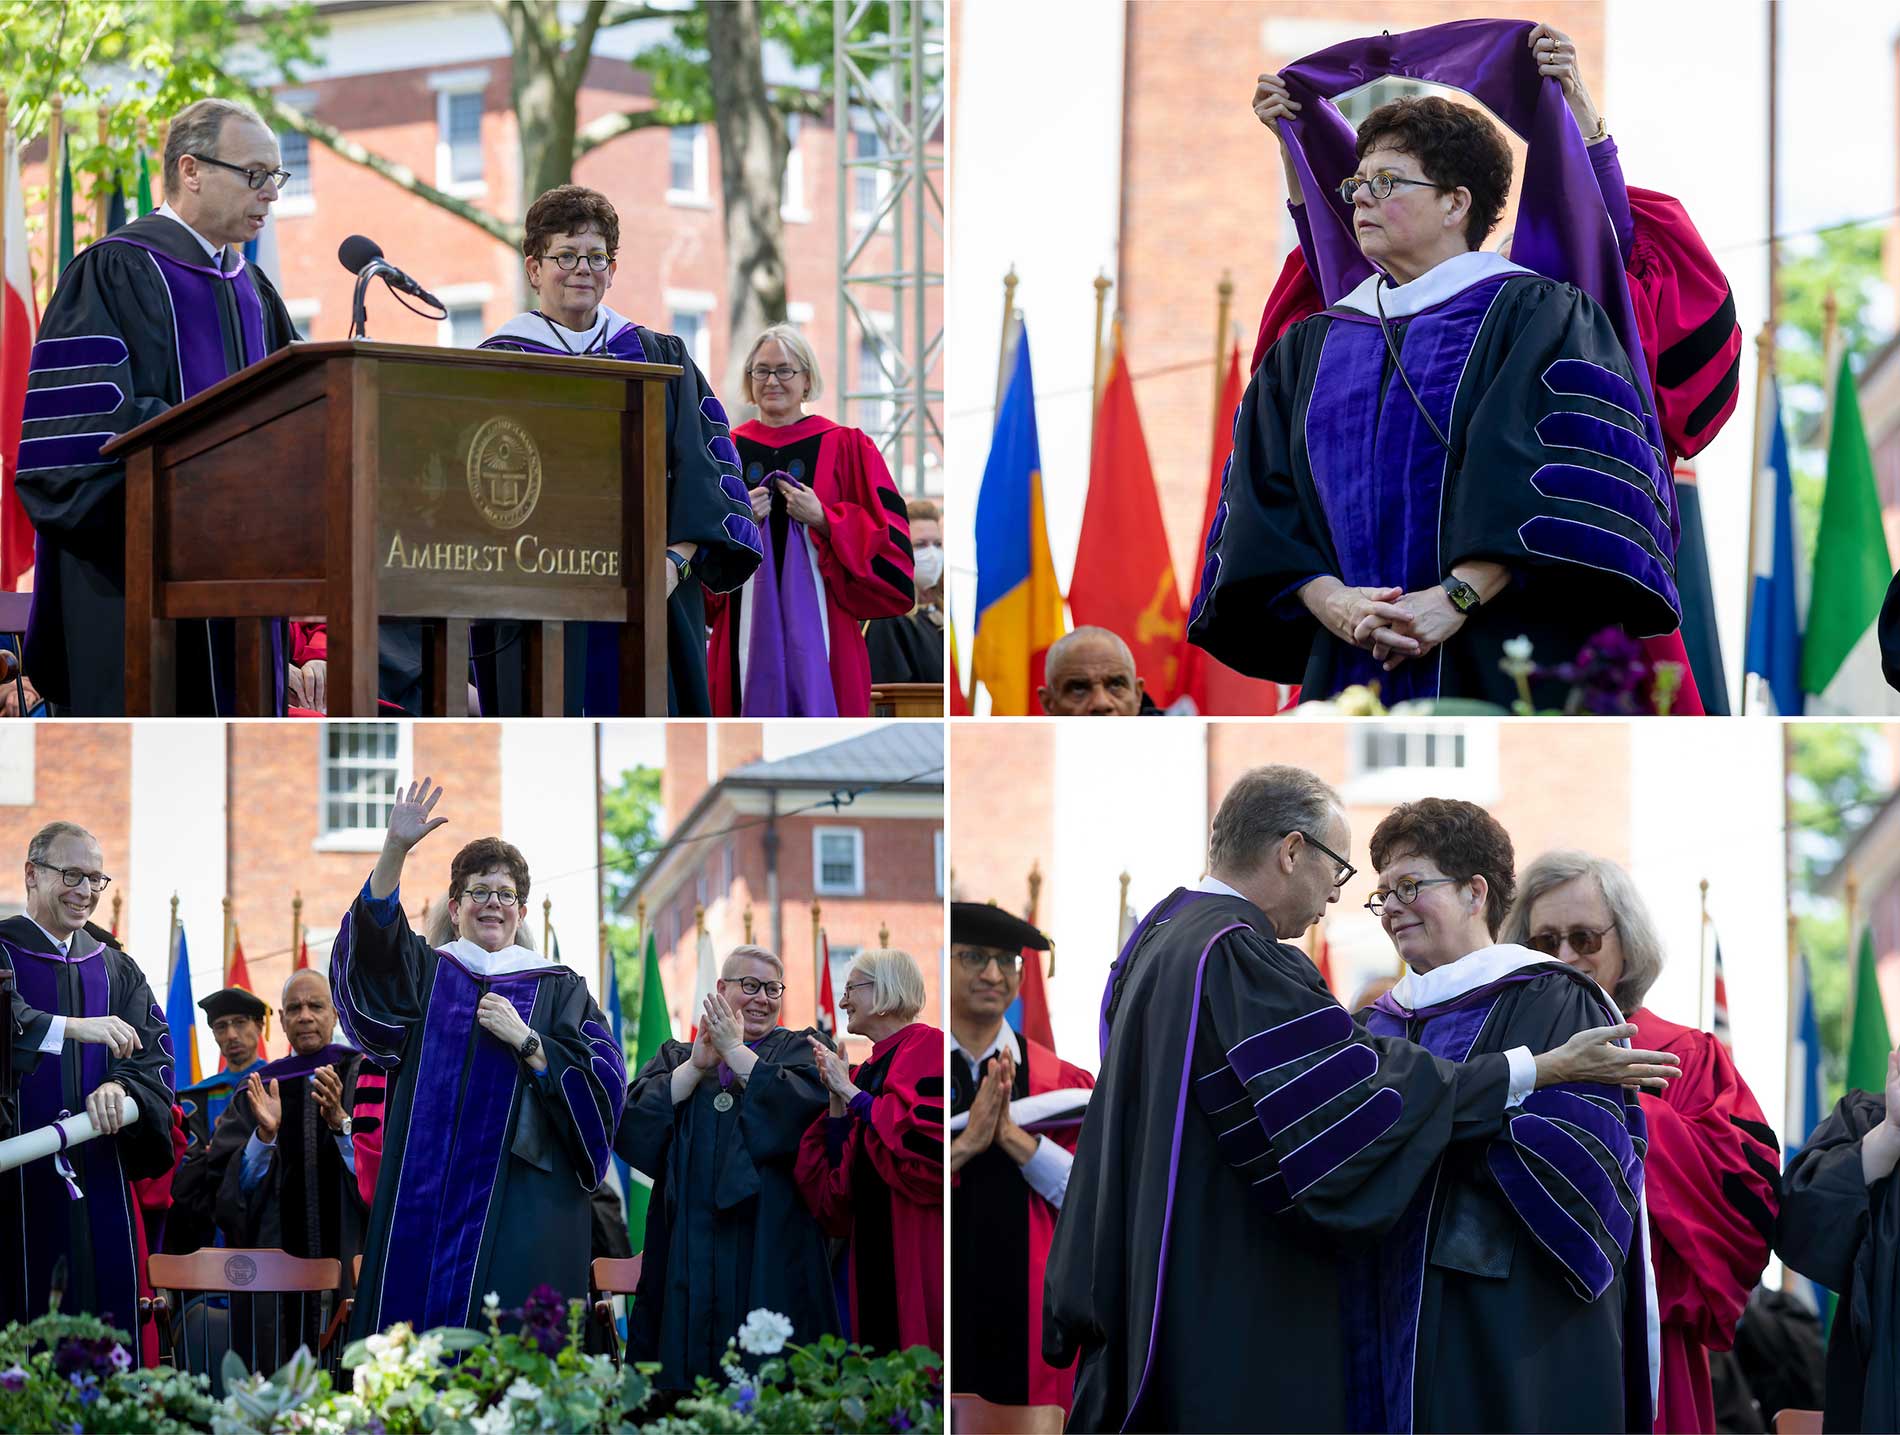 President Biddy Martin receives an honorary degree from Andrew Nussbaum, Chair of the Board of trustees.